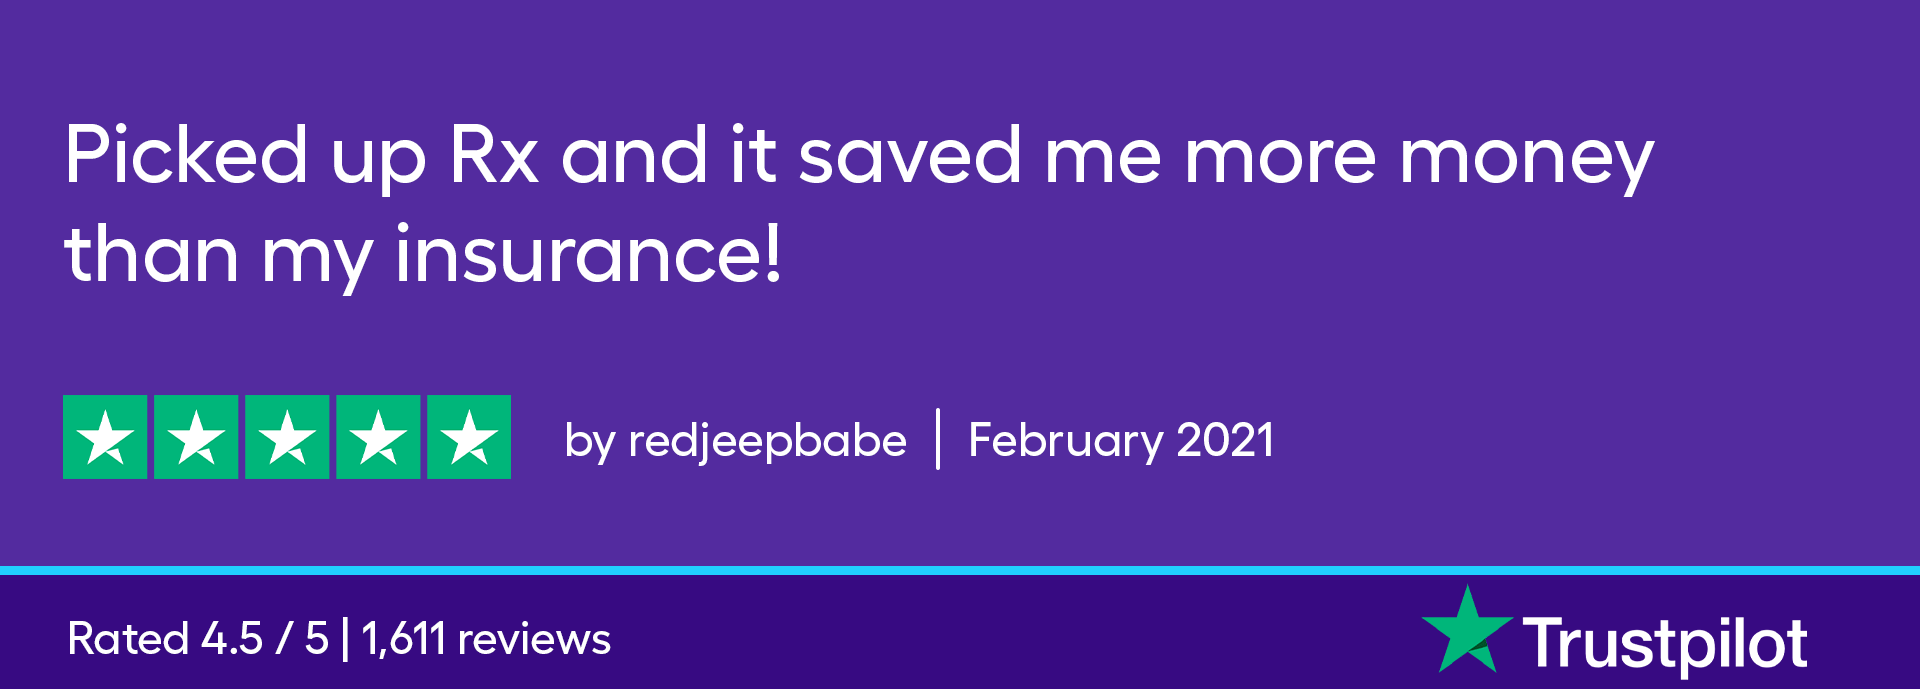  I picked up my Rx and SingleCare saved me more money than my insurance! 